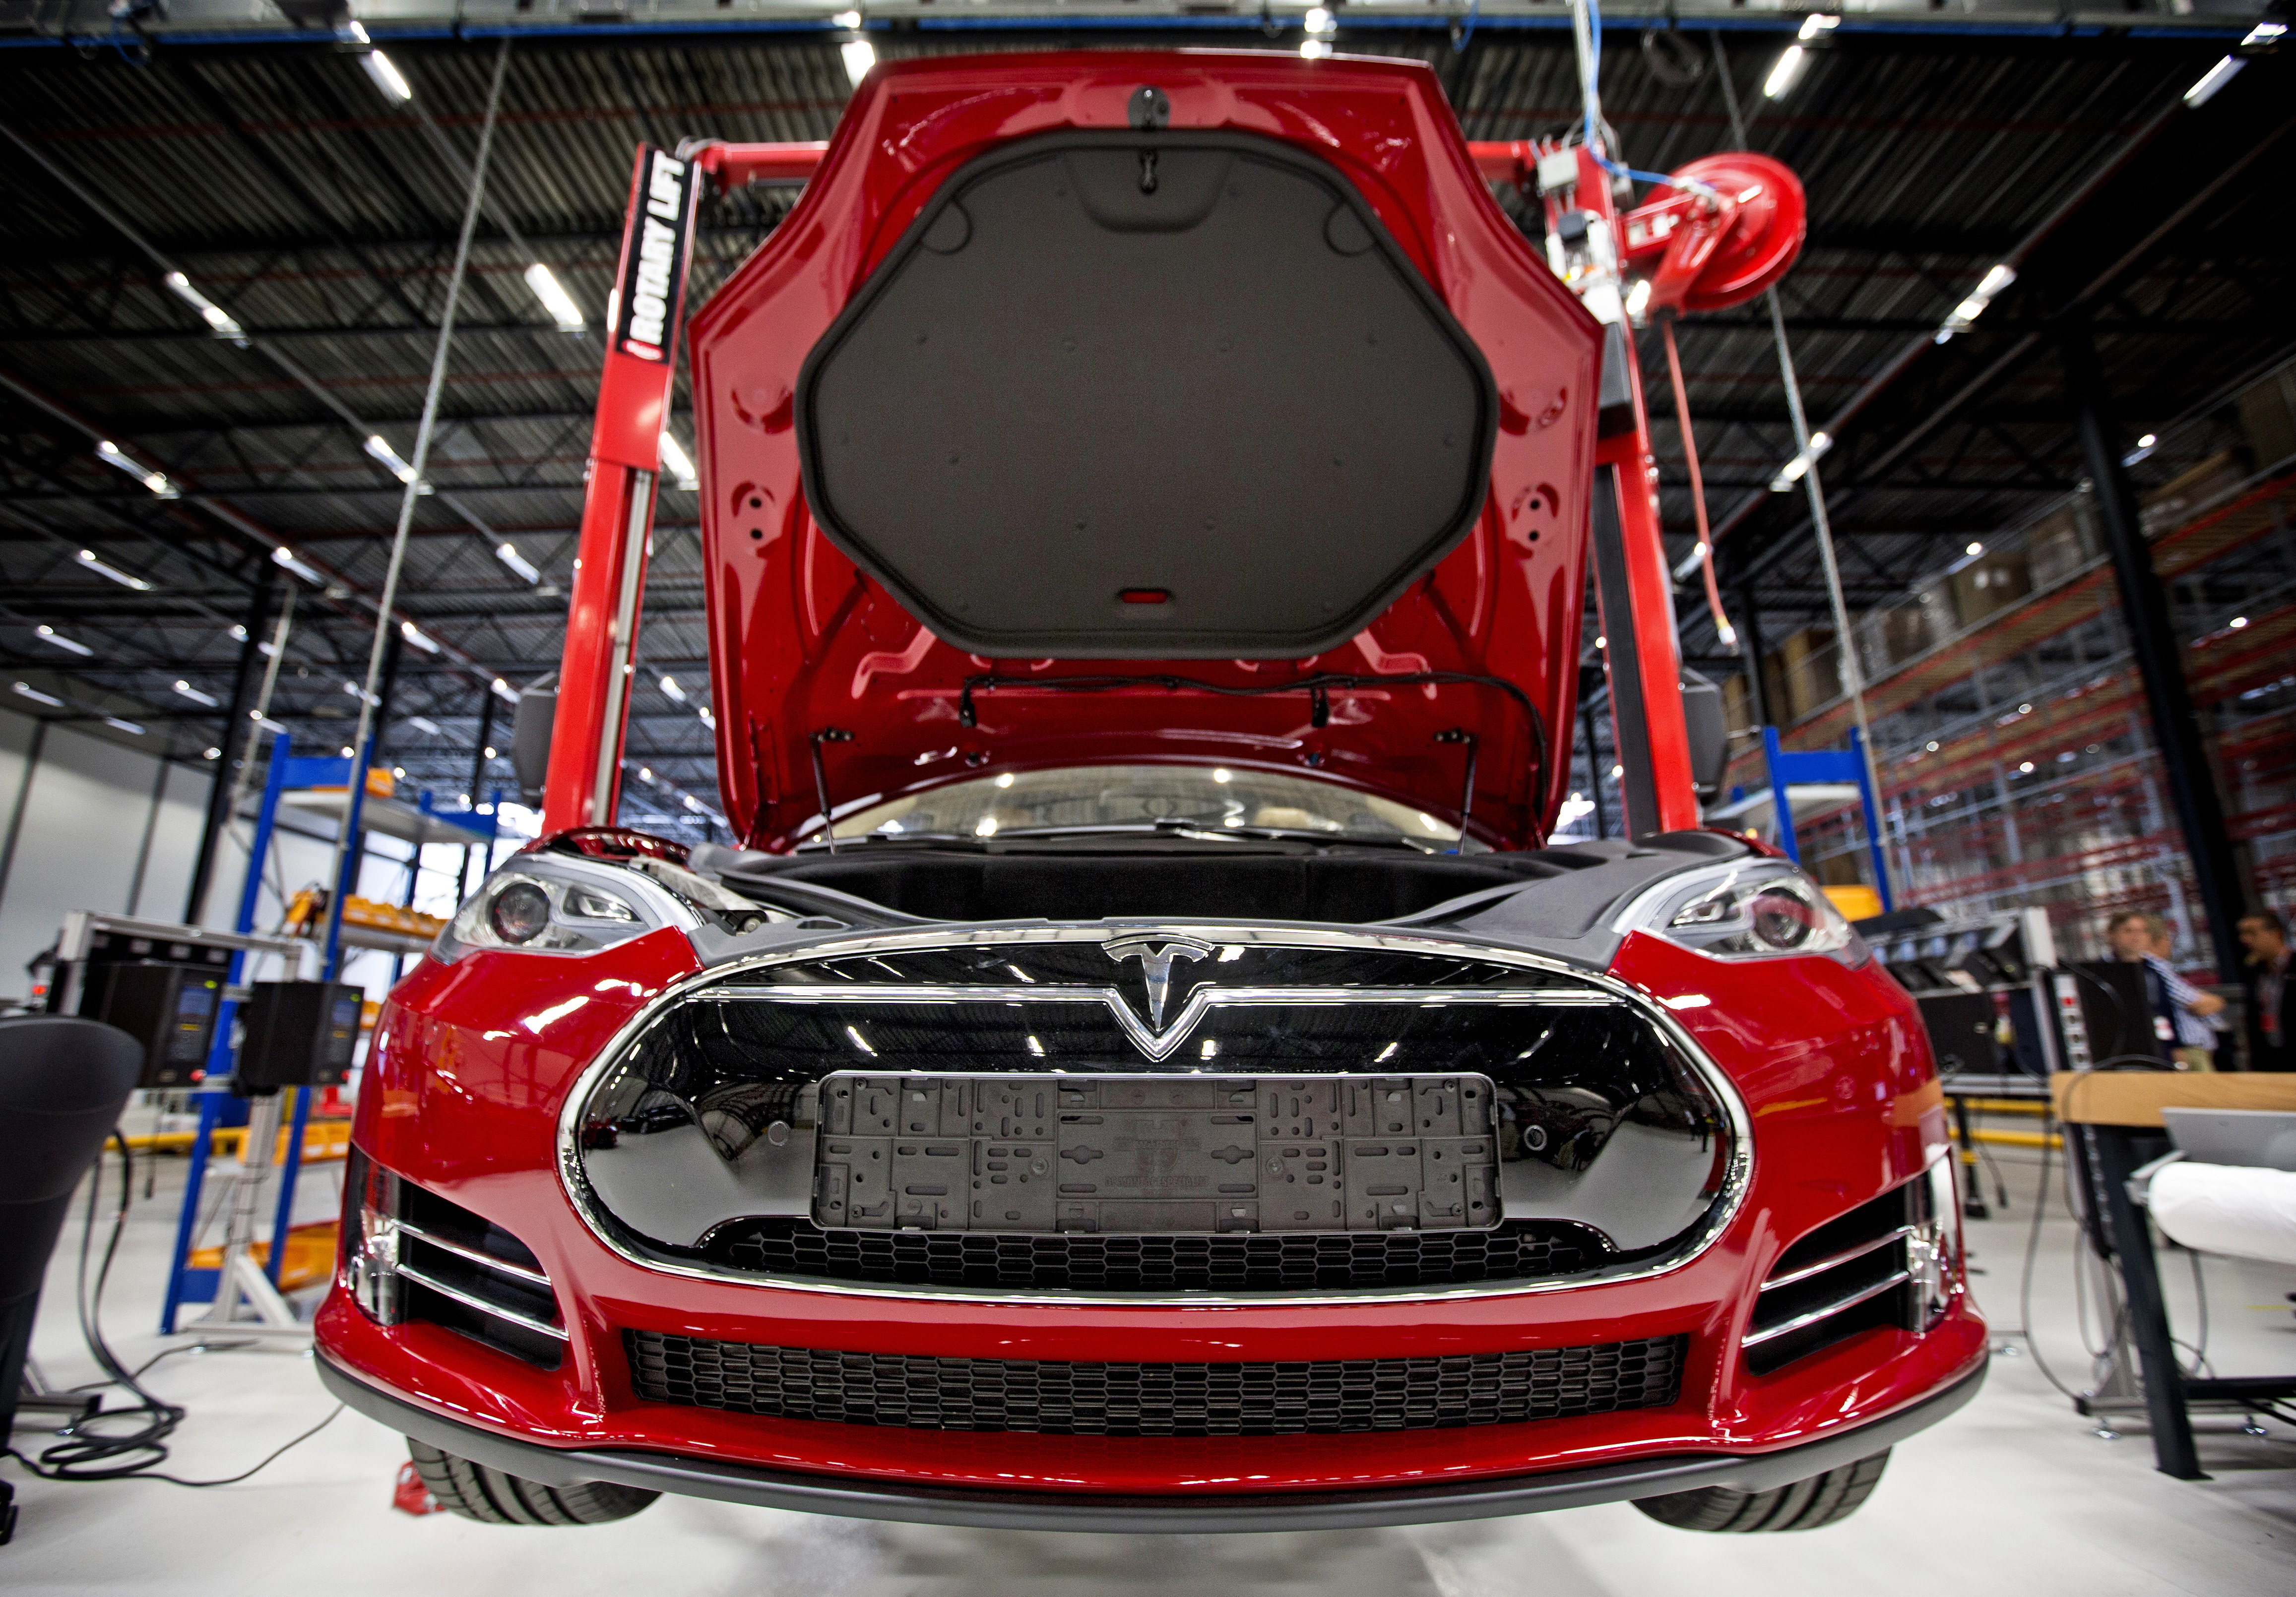 A view of a fully electric Tesla car on an assembly line at the new Tesla Motors car factory in Tilburg, the Netherlands, during the opening and launch of the new factory, on August 22, 2013. (AFP&mdash;AFP/Getty Images)